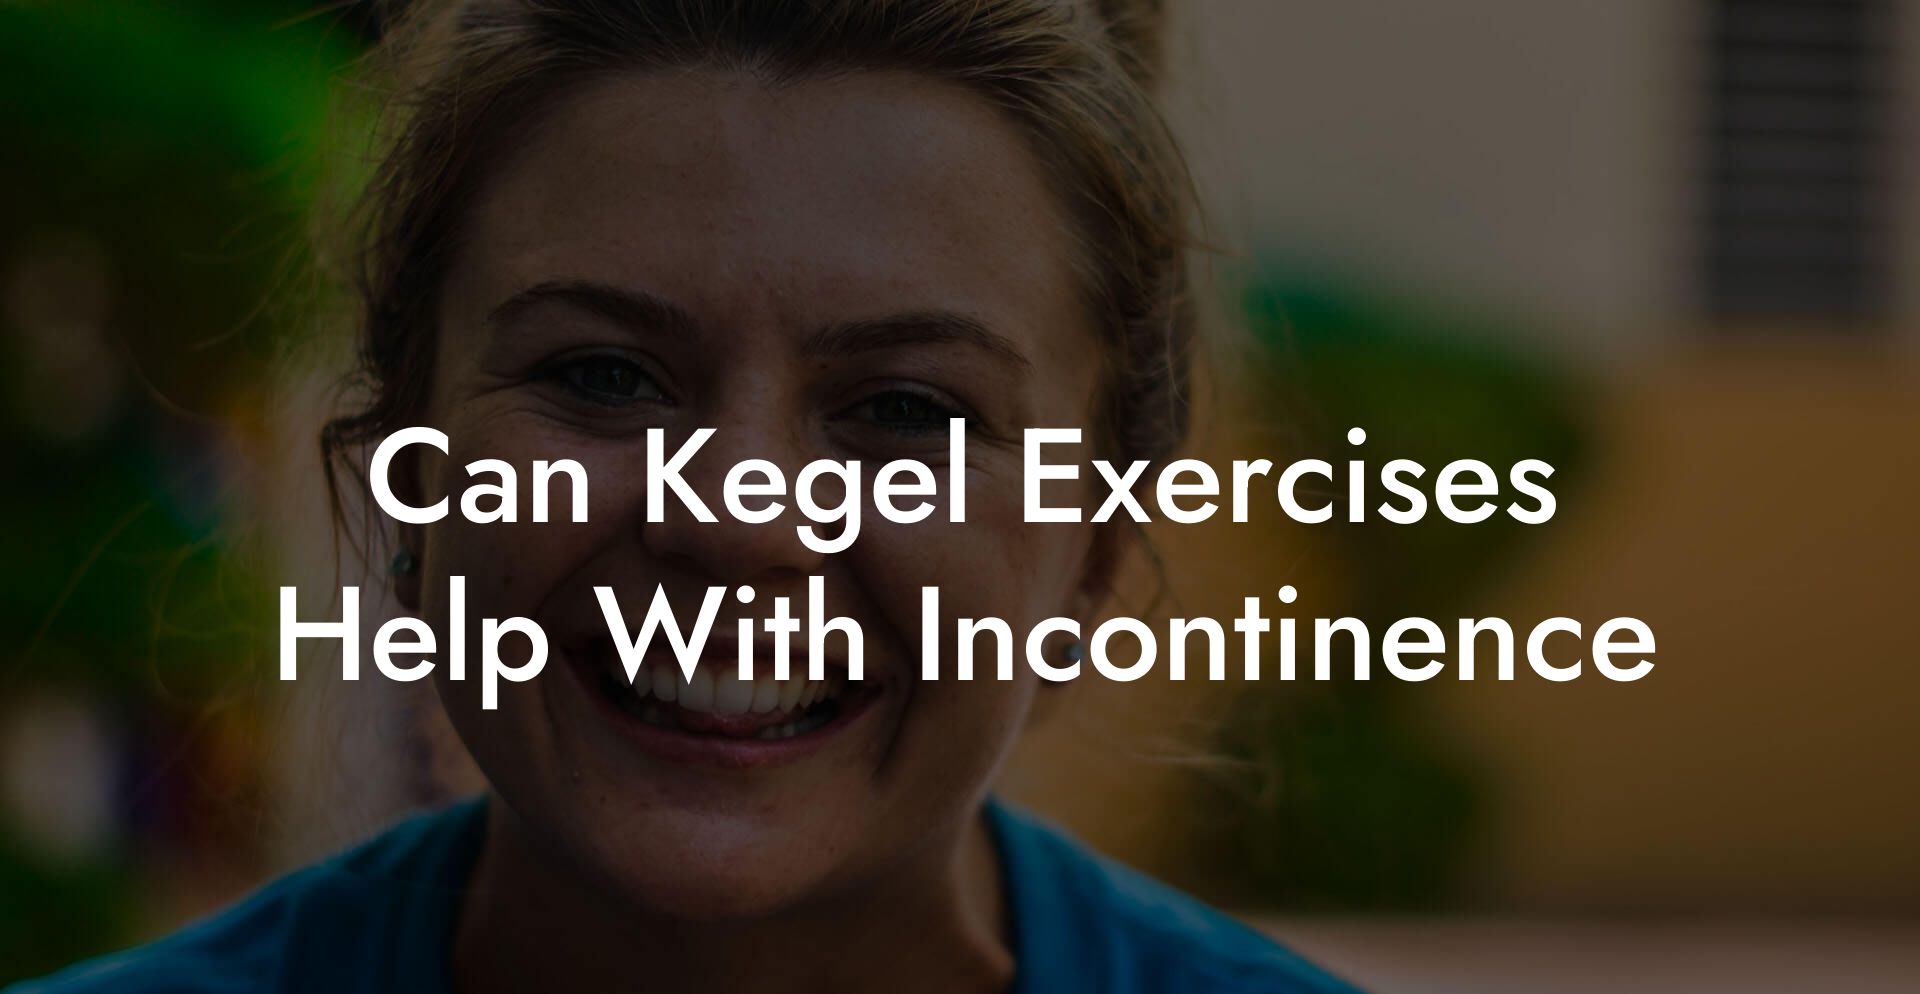 Can Kegel Exercises Help With Incontinence